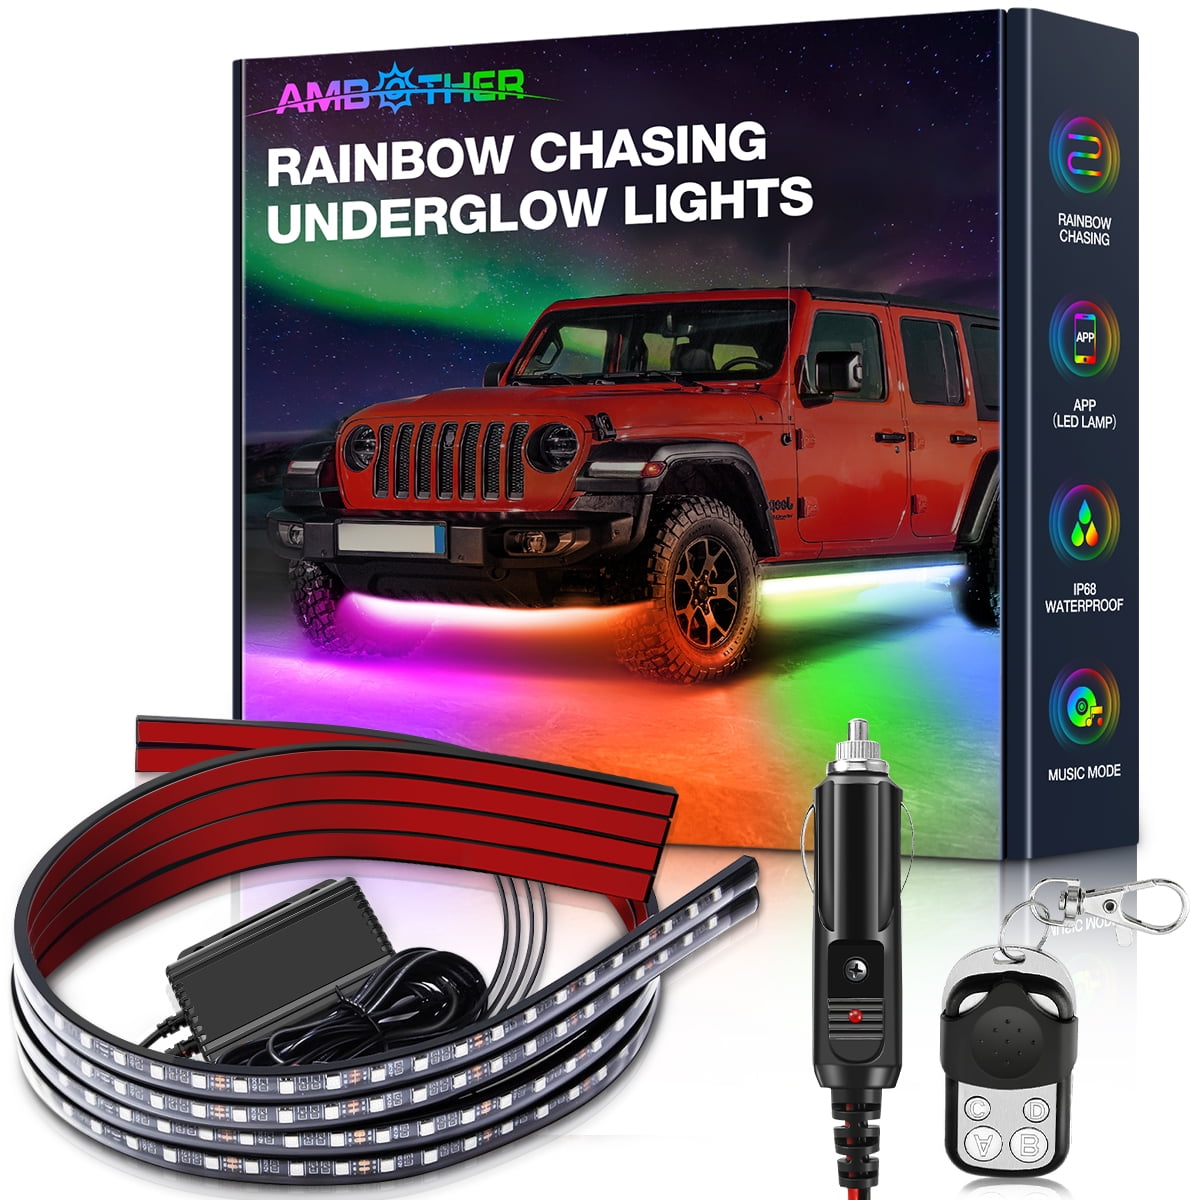 Trucks Scene Modes Exterior Car LED Lights Neon Strip Lights Kit Extension Wire 16 Million Colors Cable Tie for SUVs Rainbow Chasing Underglow Car Lights APP Remote Control Music Mode 